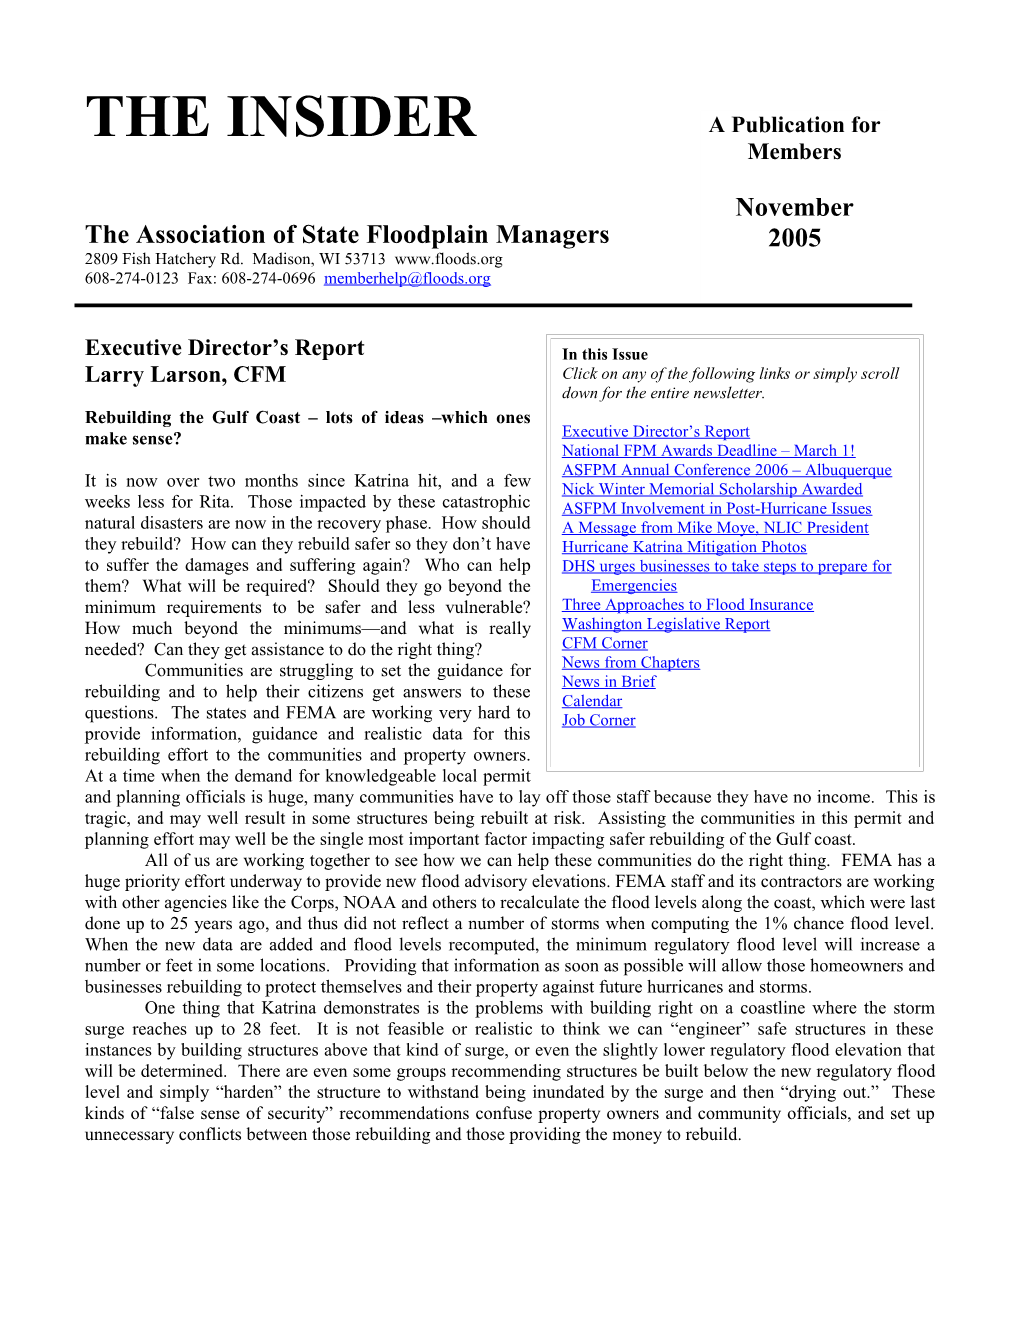 The Association of State Floodplain Managers s5